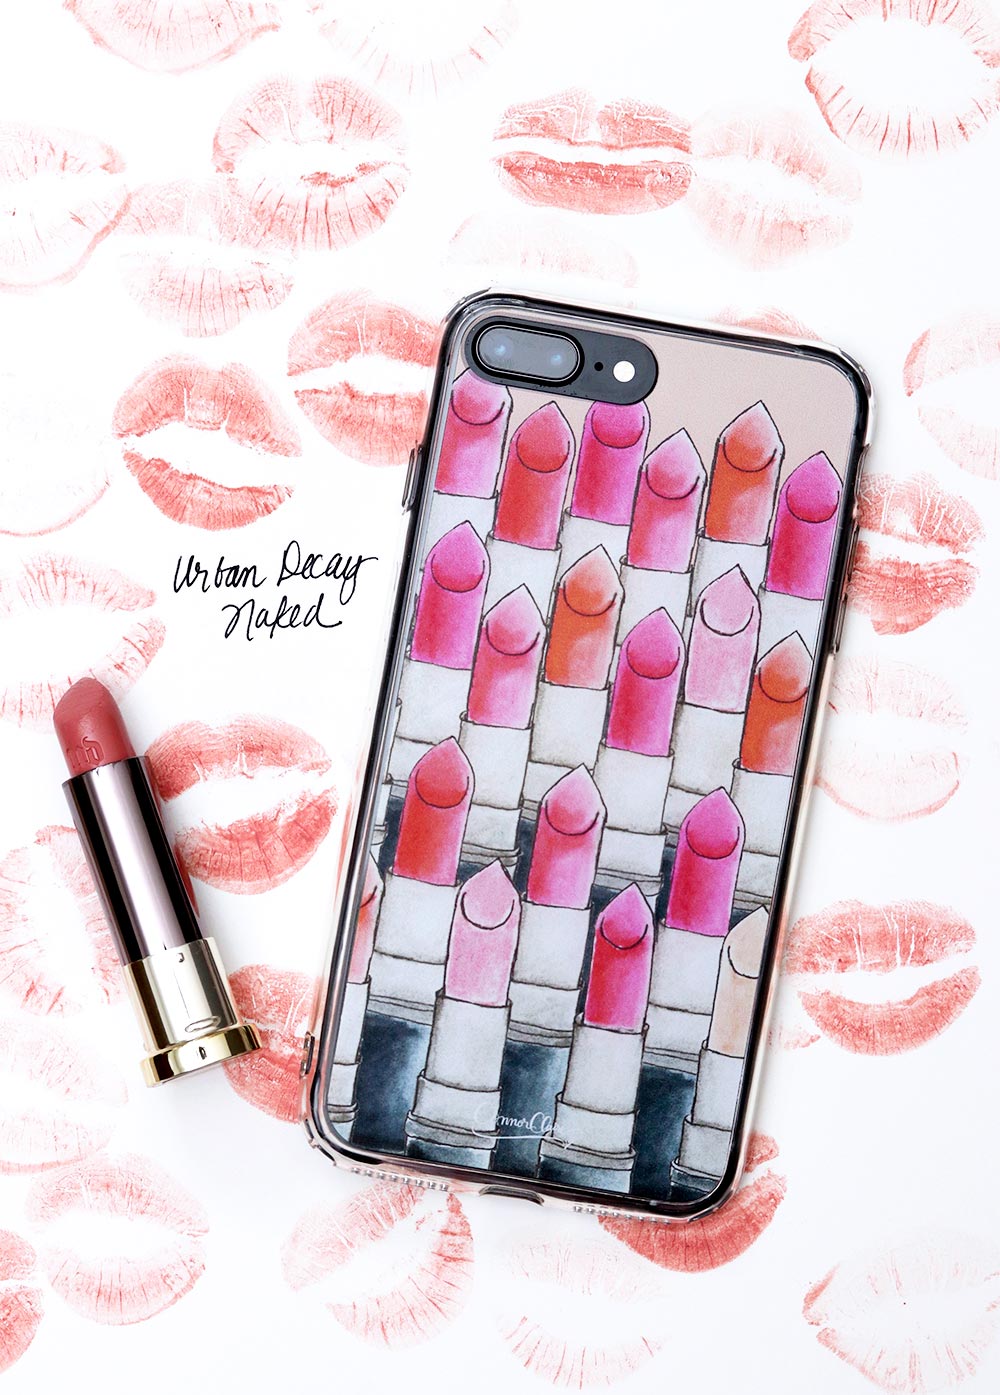 urban decay naked lipstick attention lipstick iphone case final